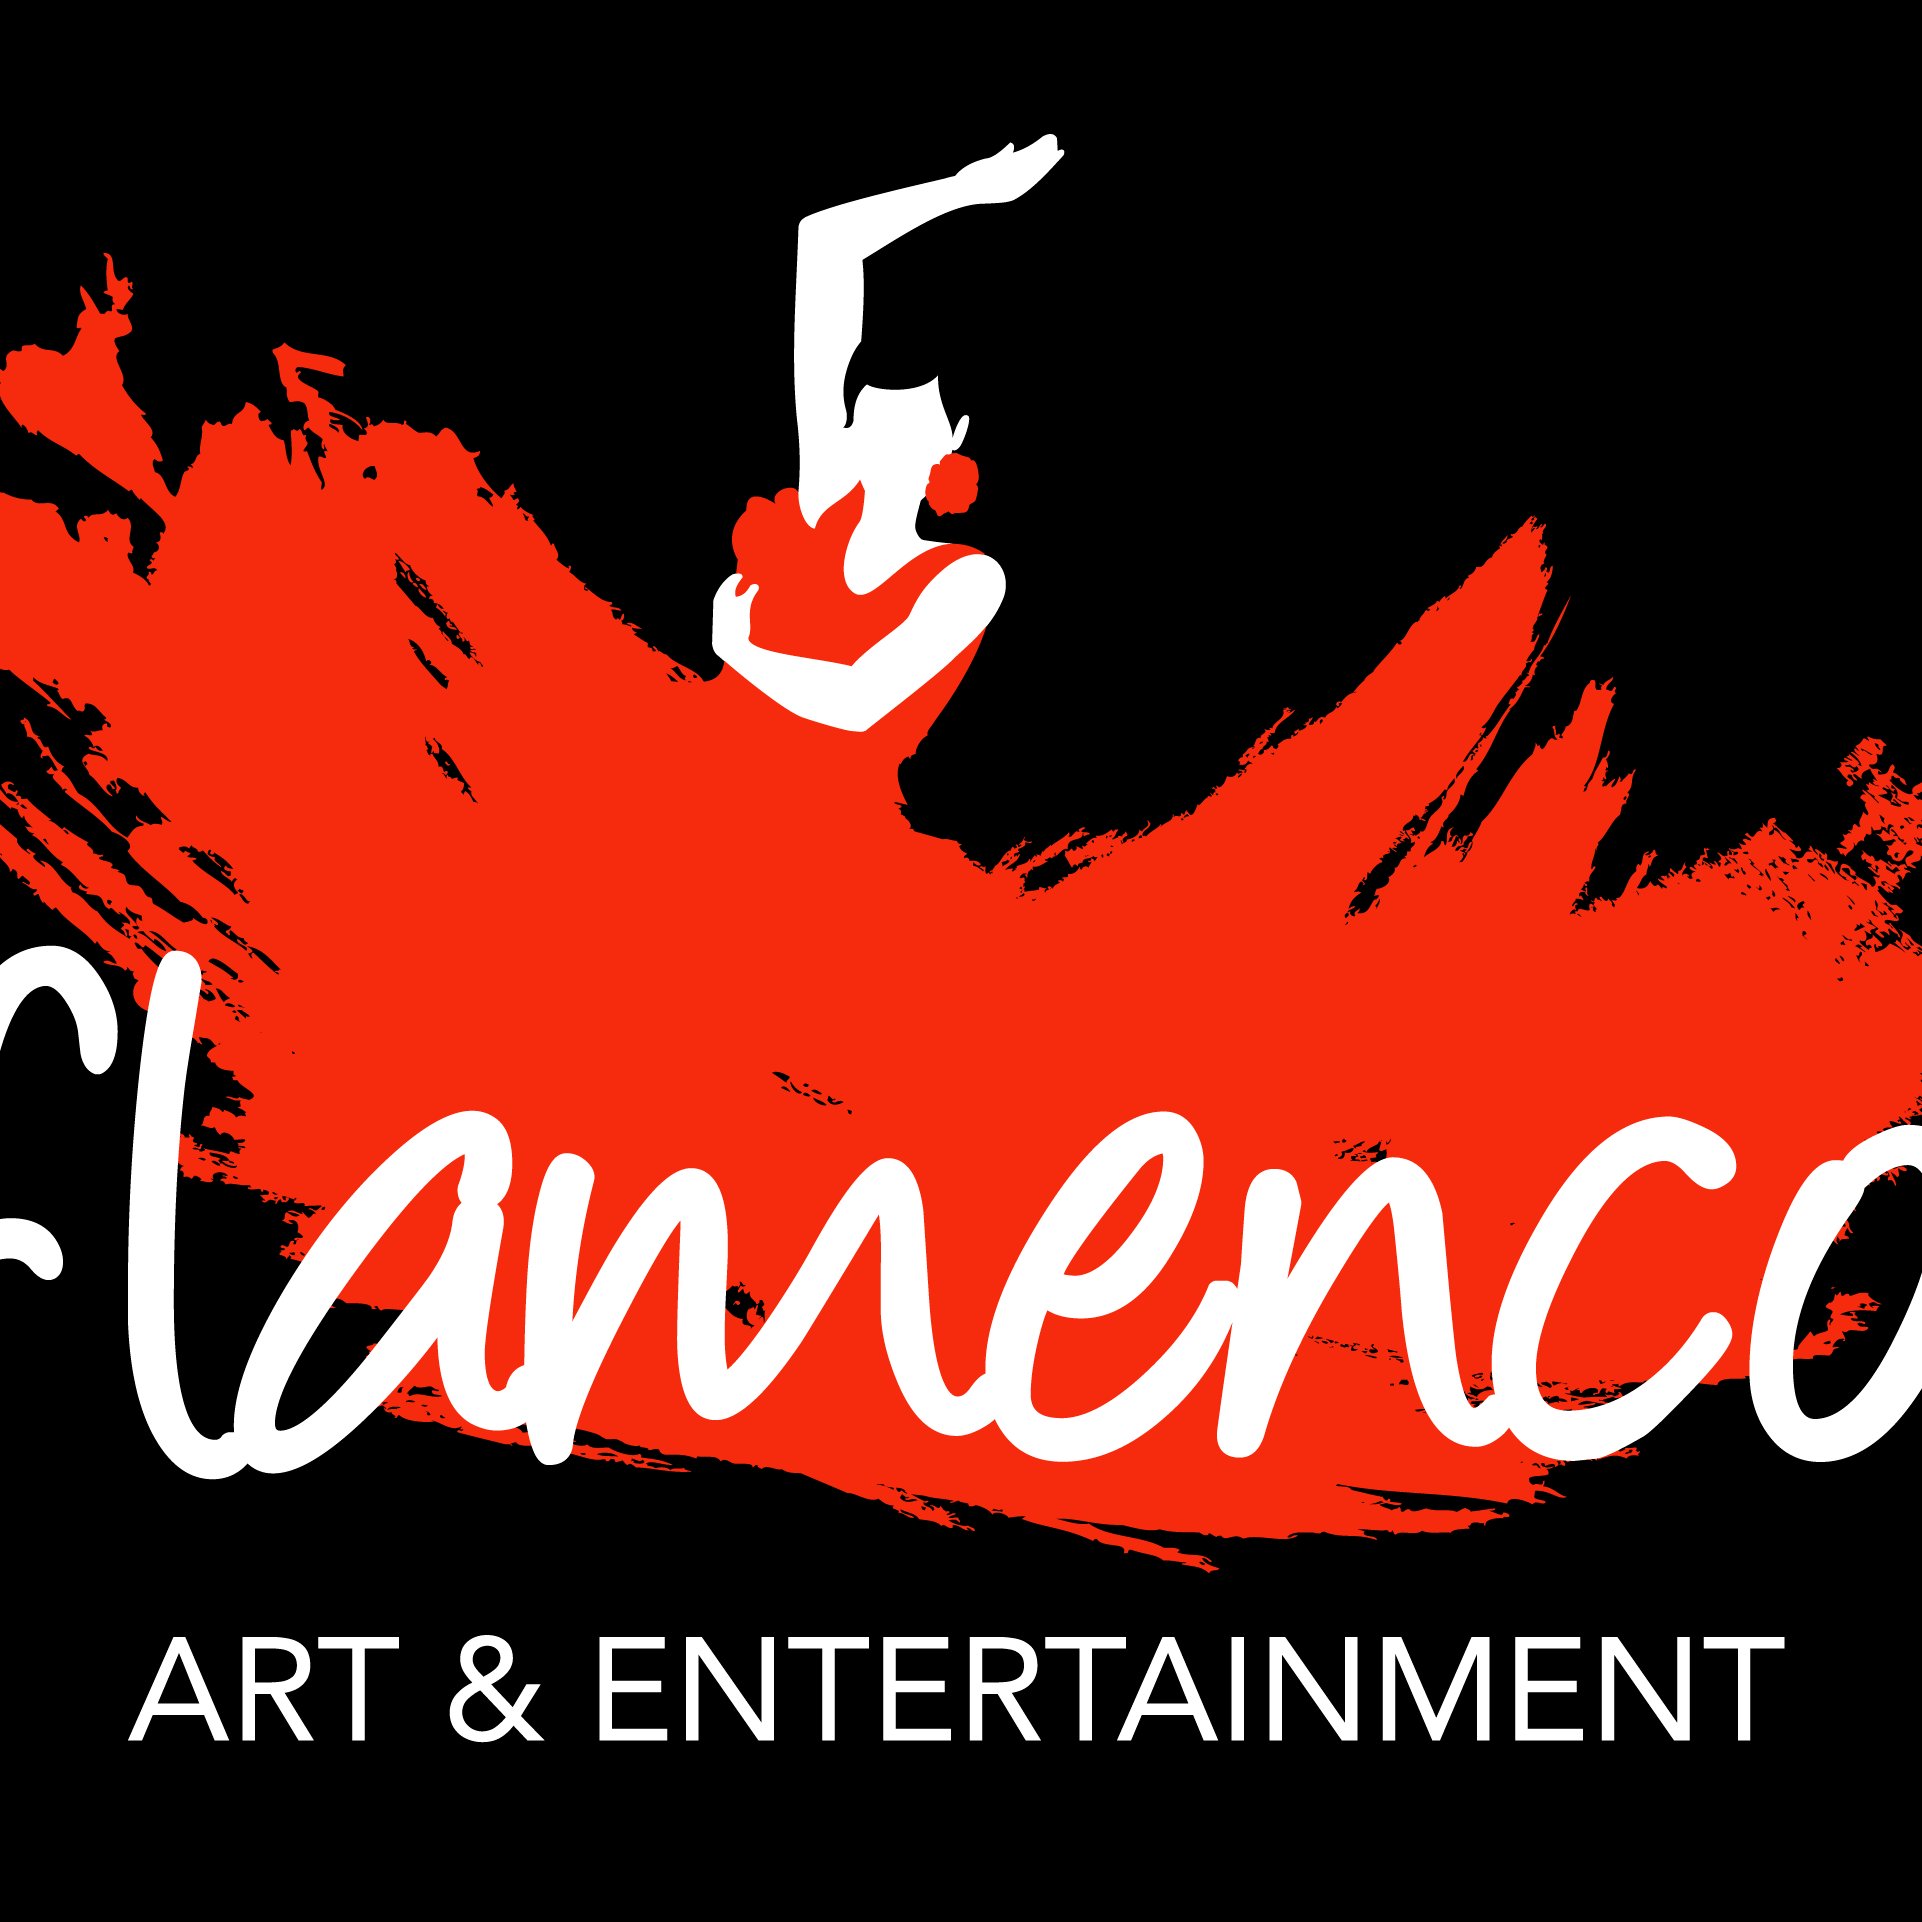 Flamenco Art & Entertainment is now in Dubai to provide all Middle
East with Professional Performance and Talent!